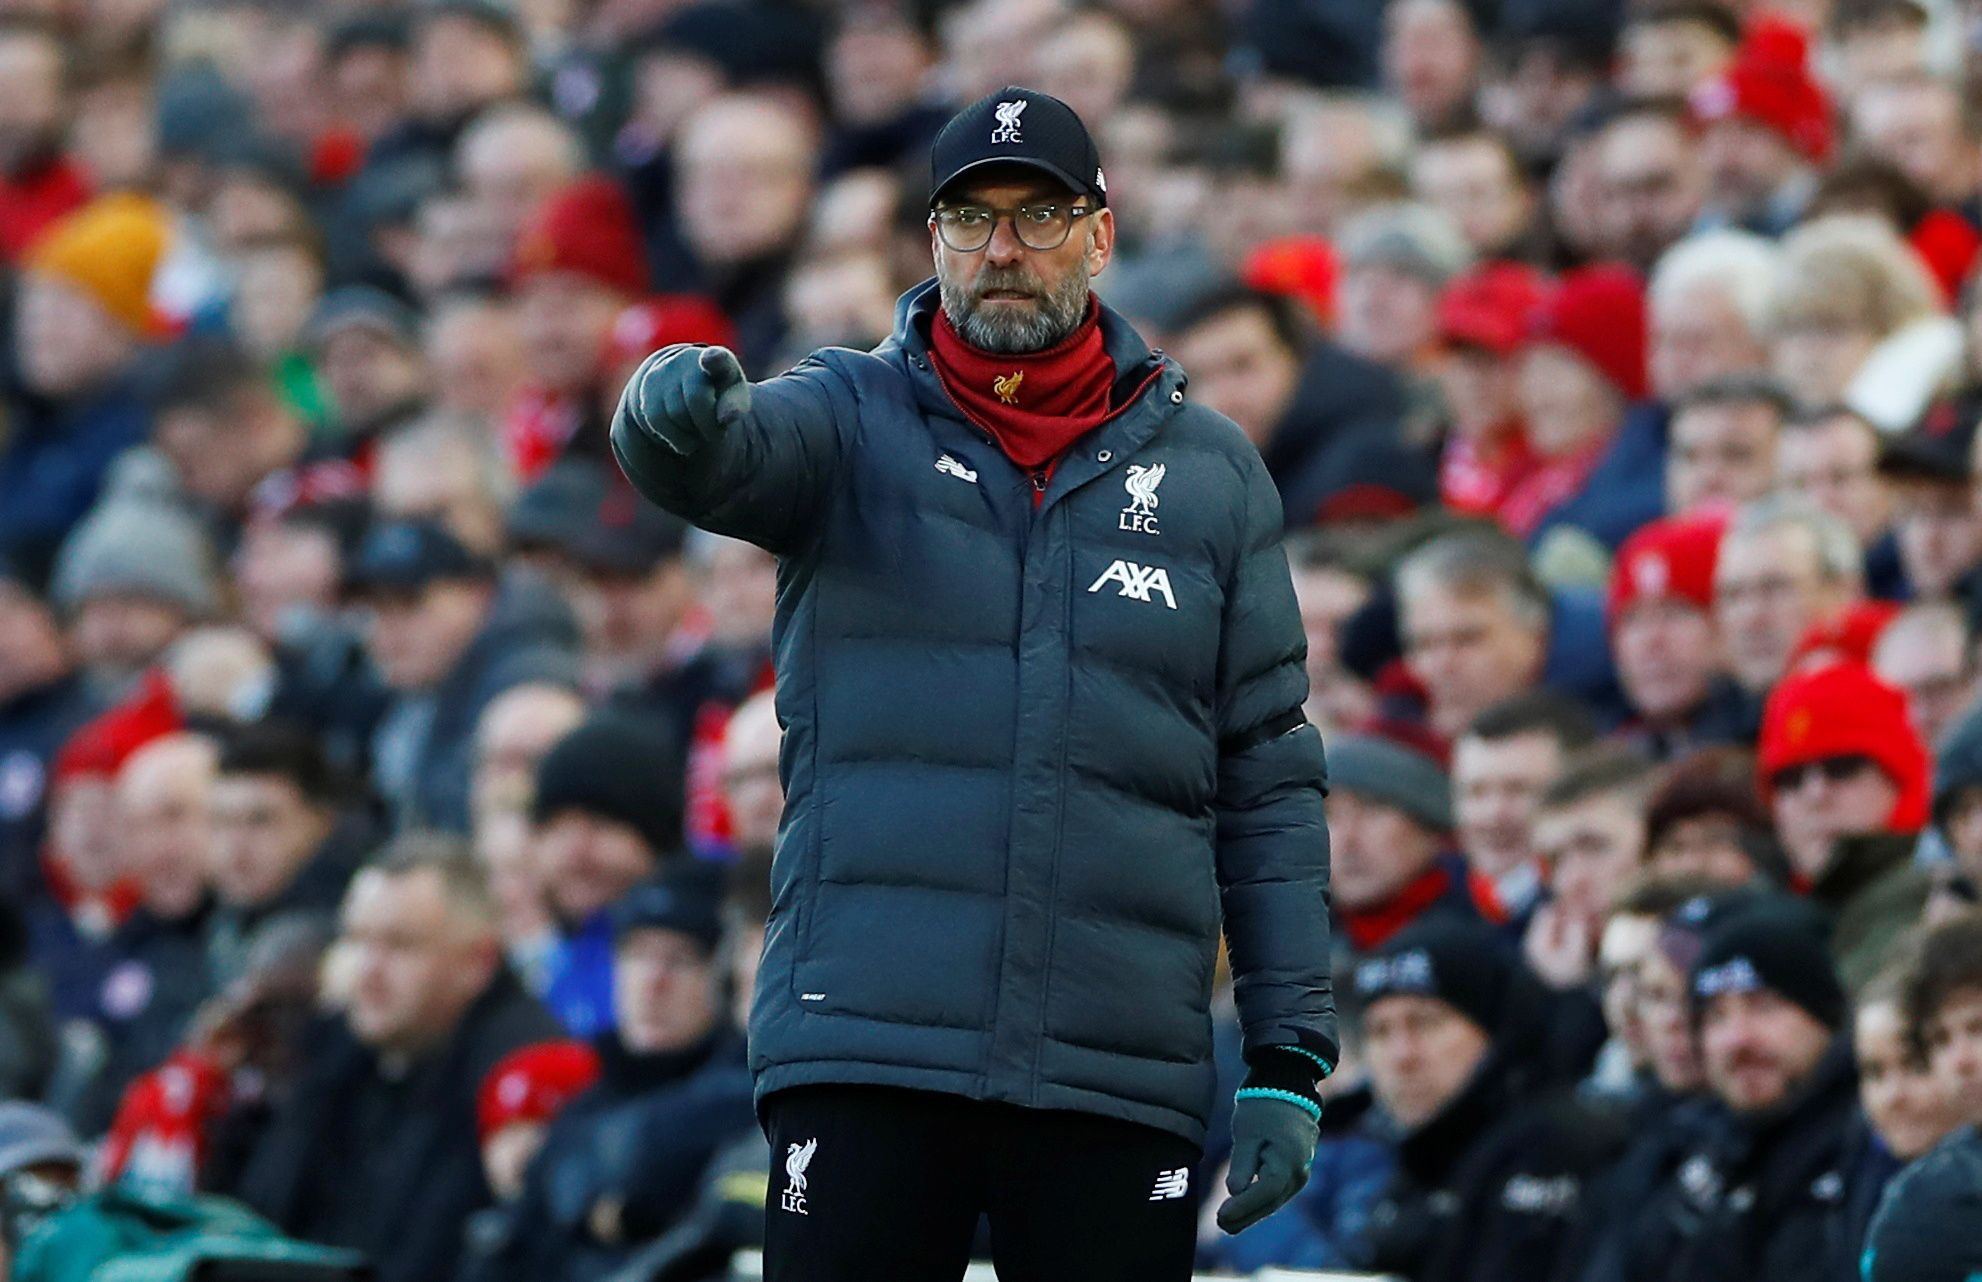 Soccer Football - Premier League - Liverpool v Brighton &amp; Hove Albion - Anfield, Liverpool, Britain - November 30, 2019 Liverpool manager Juergen Klopp  Action Images via Reuters/Jason Cairnduff  EDITORIAL USE ONLY. No use with unauthorized audio, video, data, fixture lists, club/league logos or 